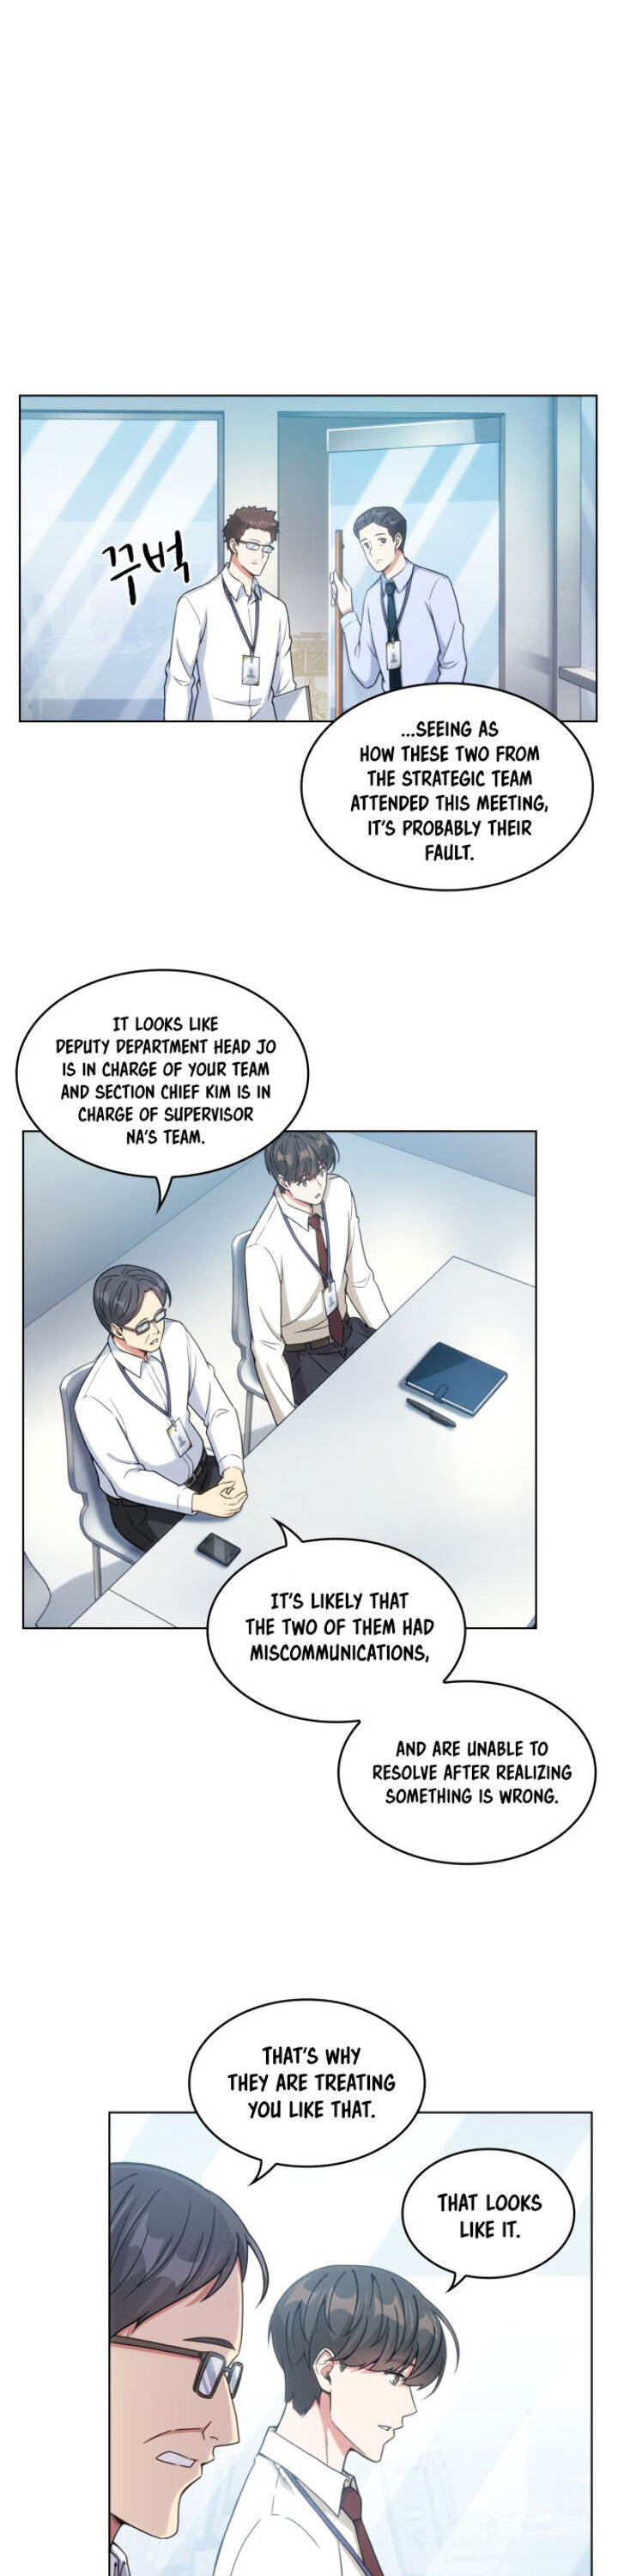 My Office Noona’s Story - Chapter 27 Page 16